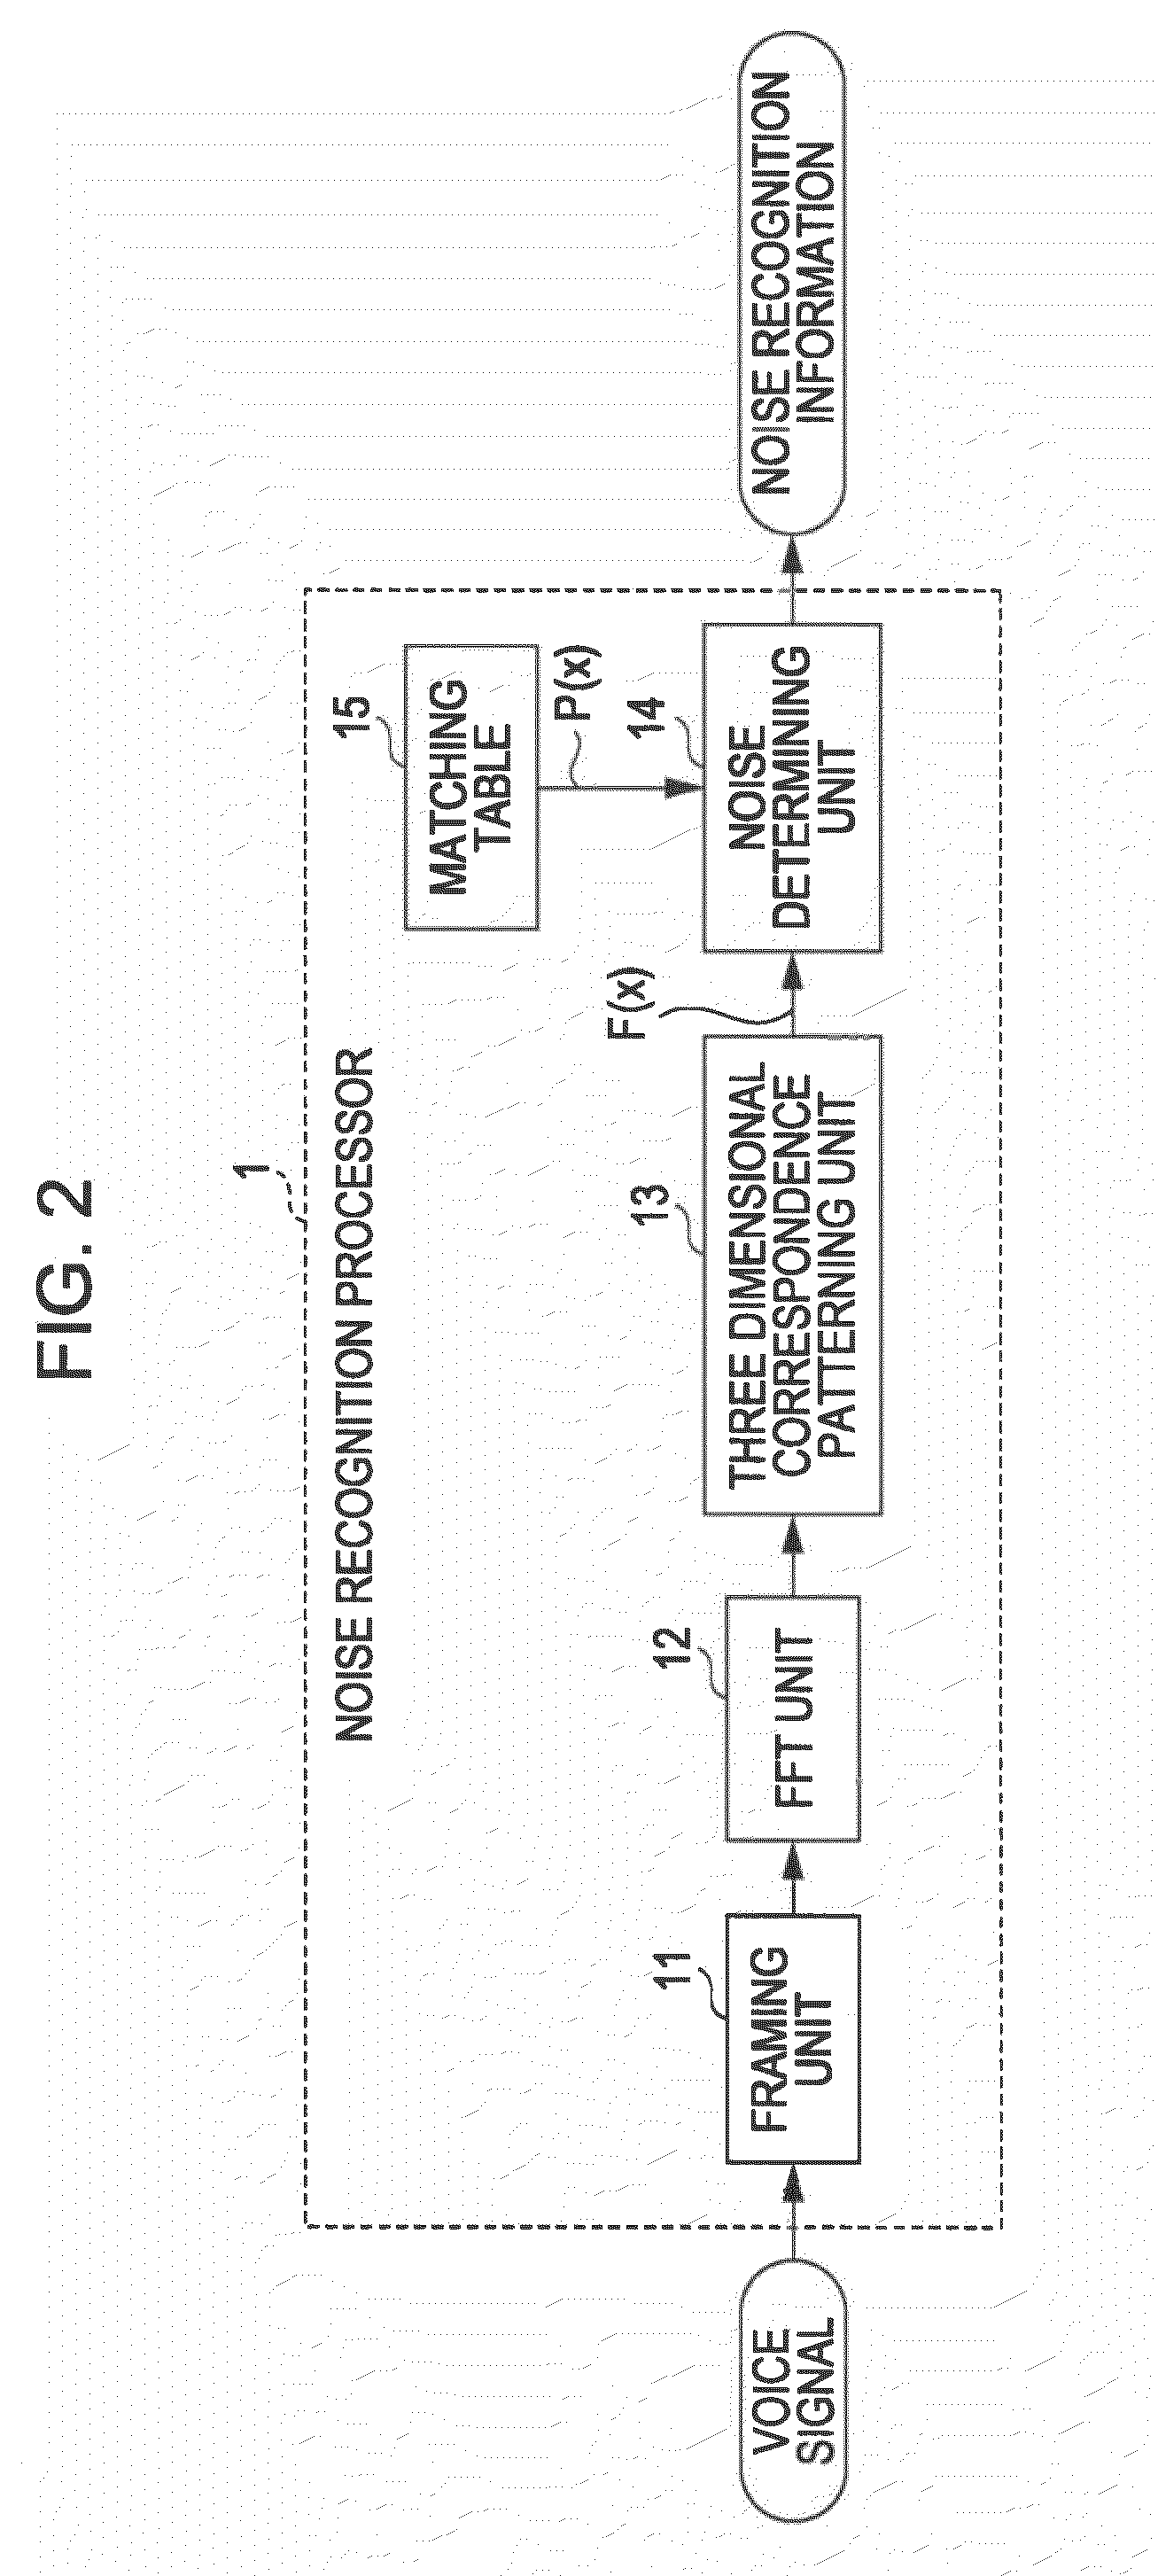 Noise reducing apparatus and noise reducing method